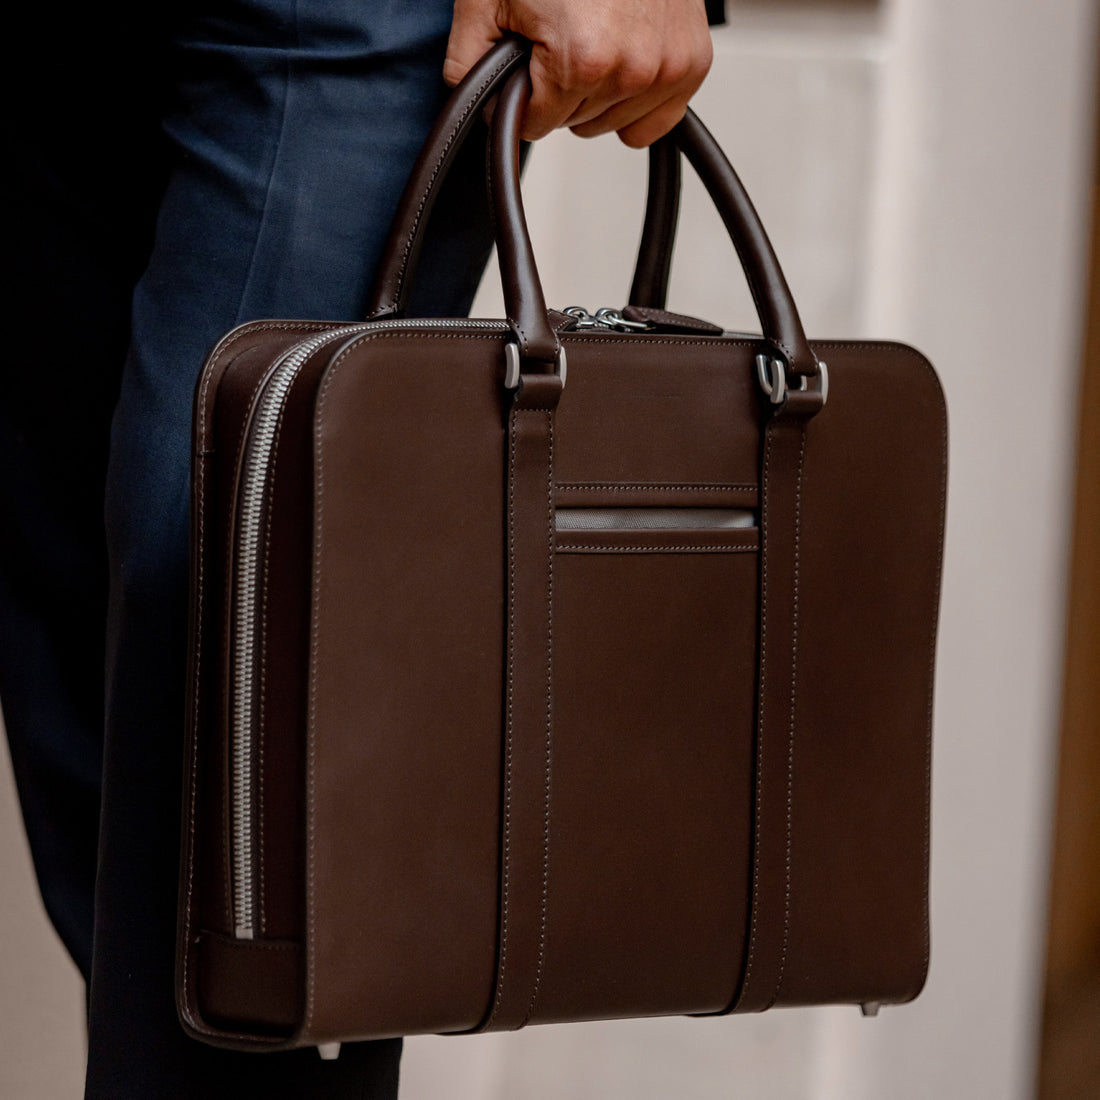 A person in formal attire holding a brown leather briefcase.